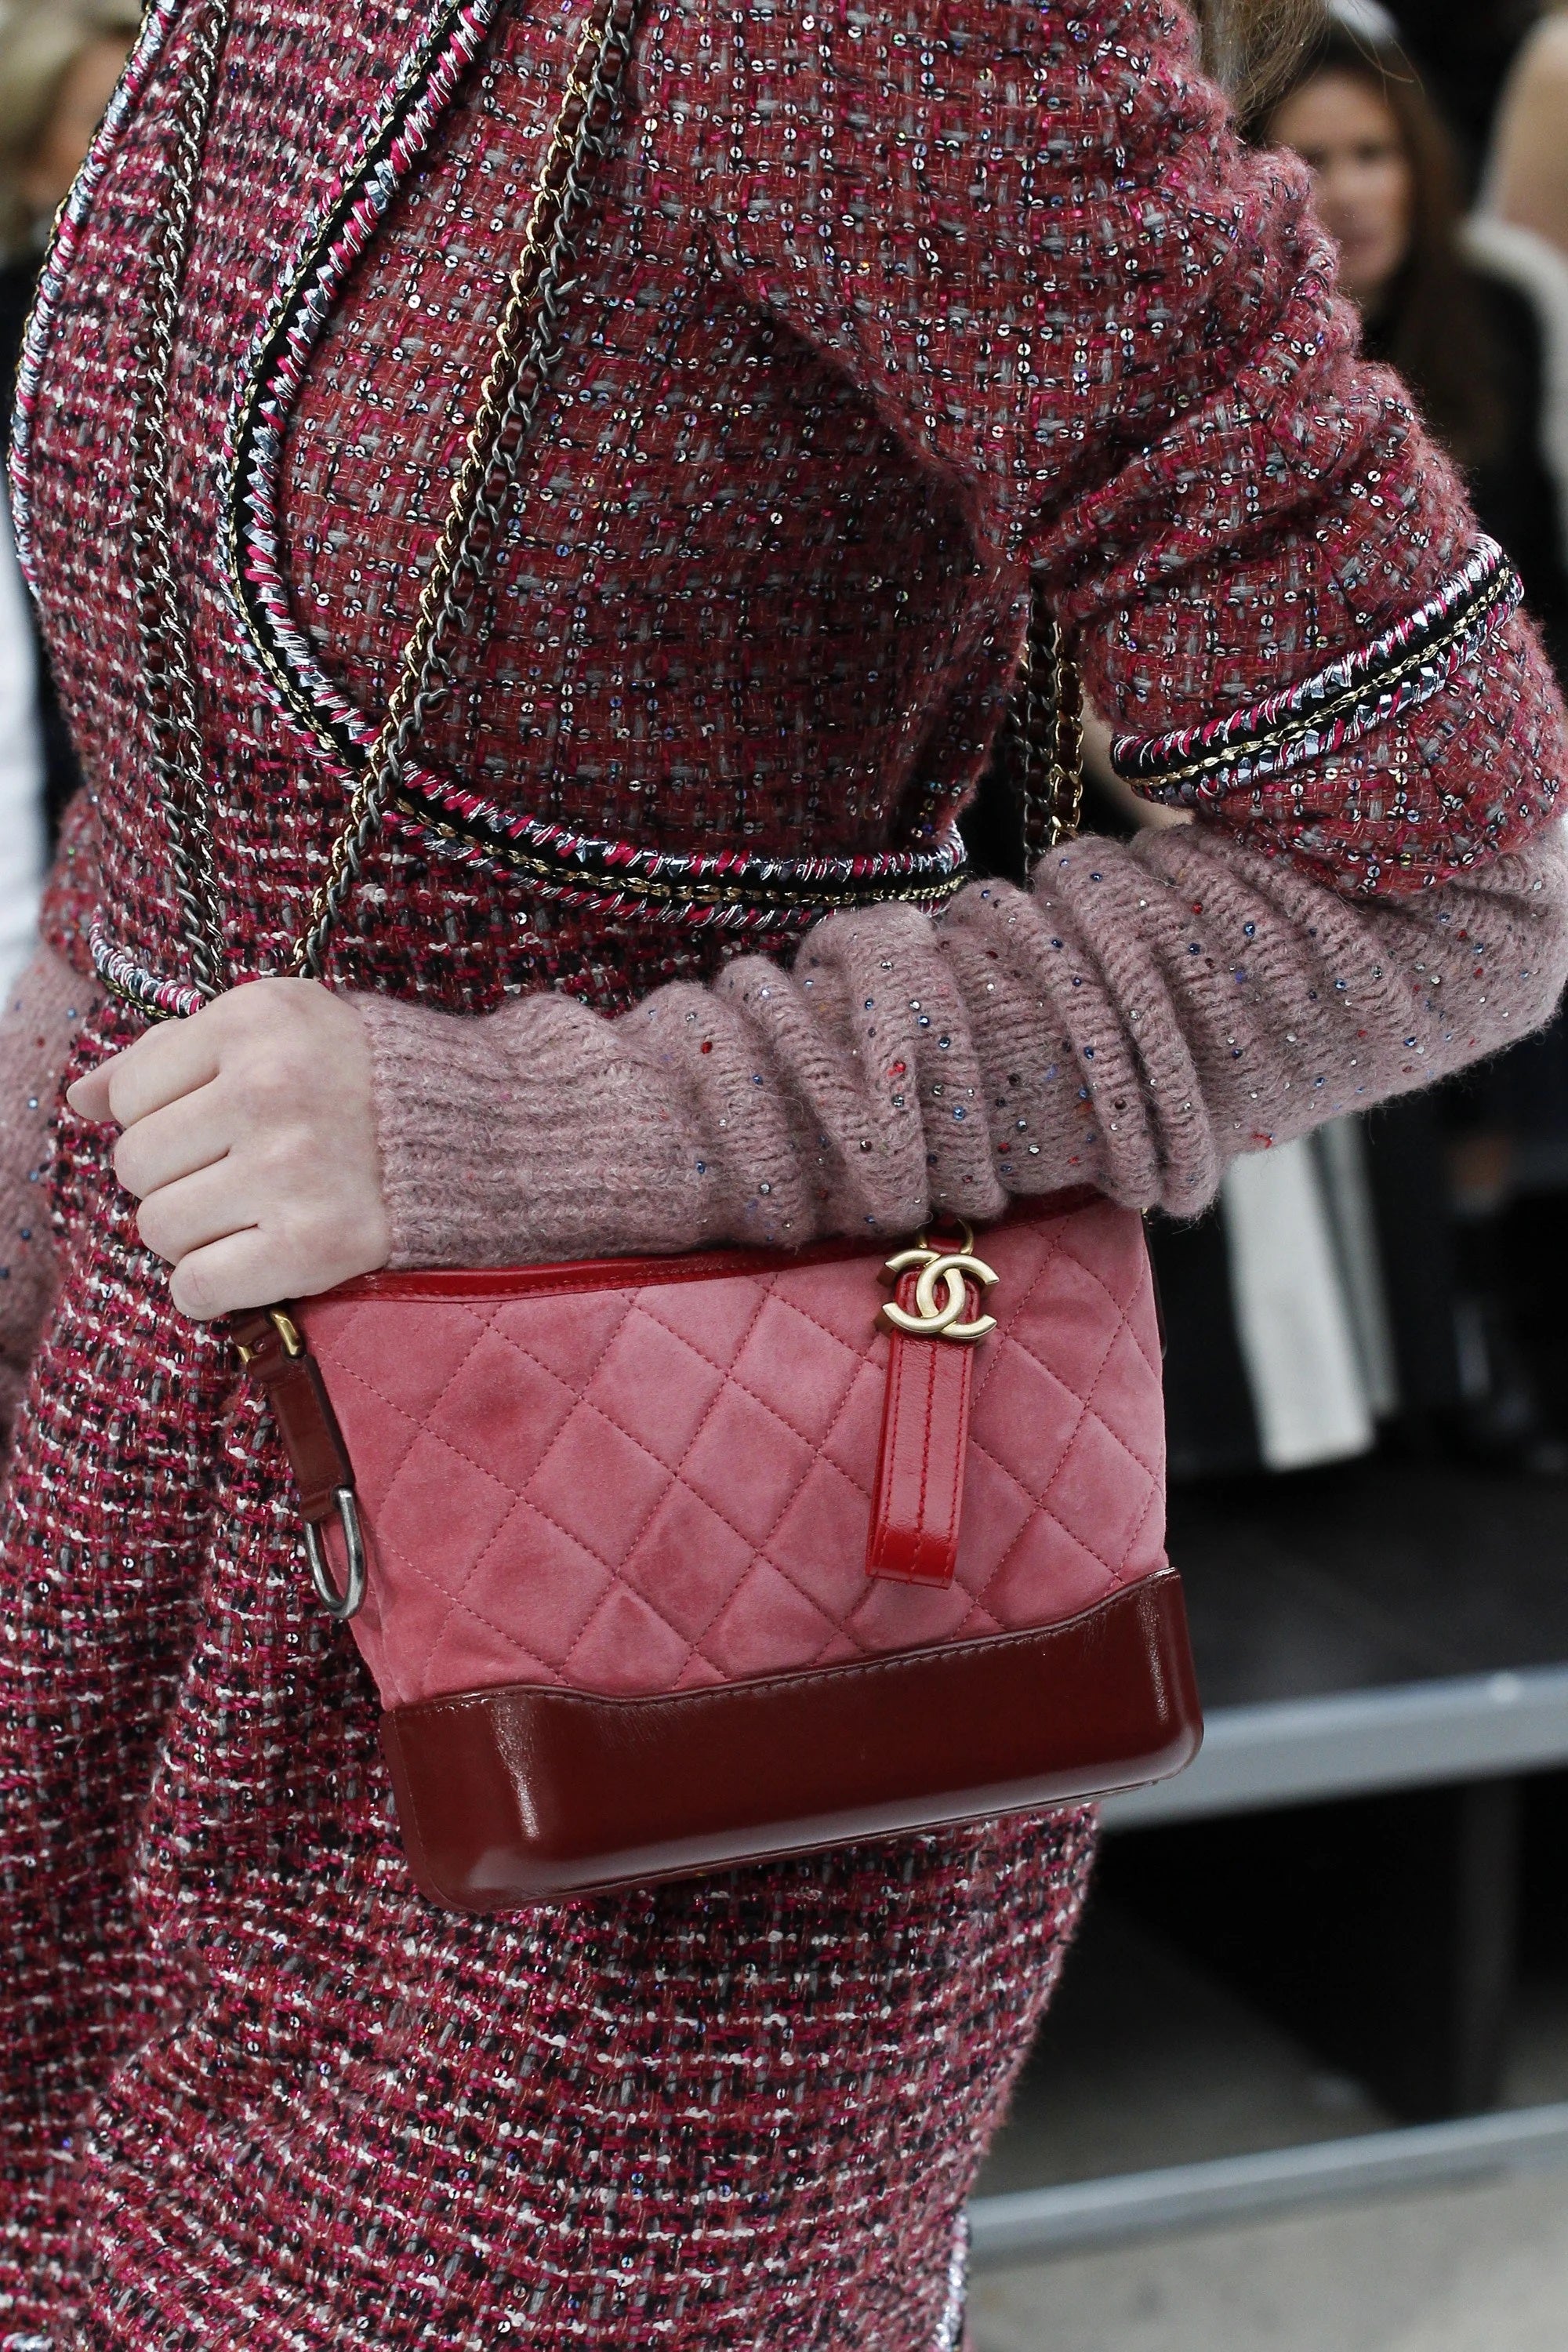 Where Are Popular Chanel Handbags The Cheapest?